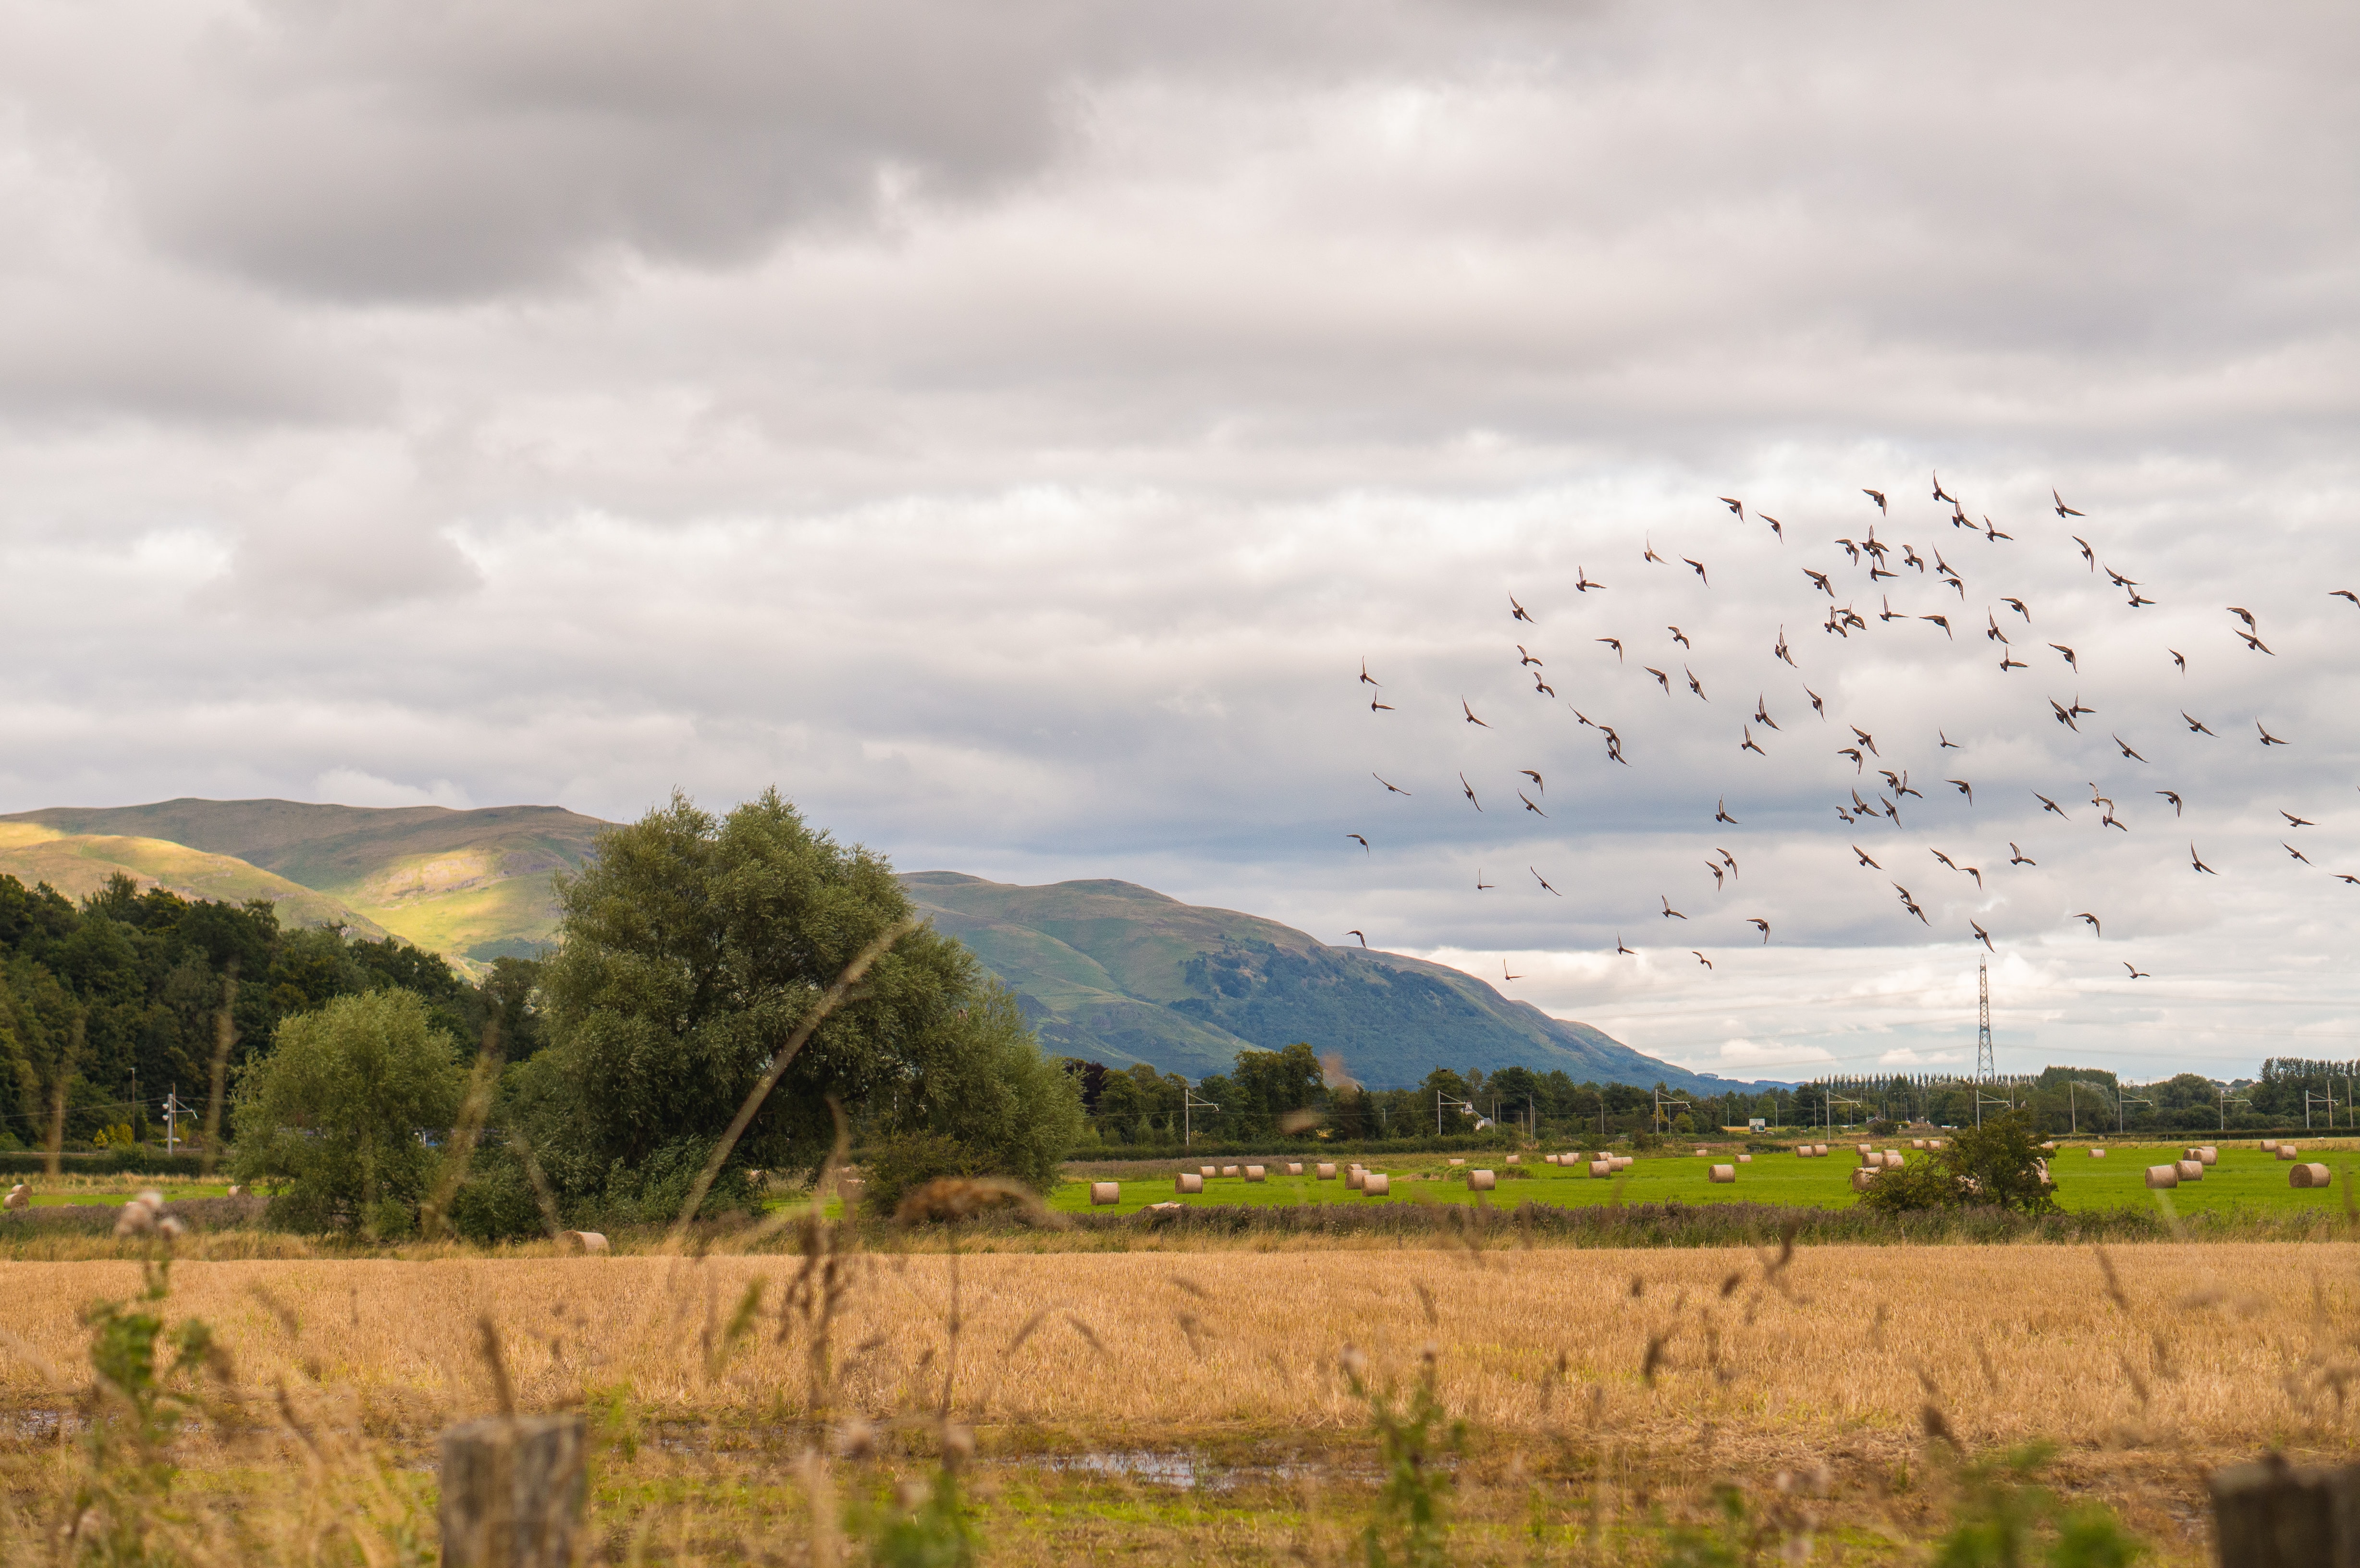 A photo of a UK countryside under grey clouds with a flock of birds flying and steep hills in the background. Photo by baeilis garvey via Unsplash. 